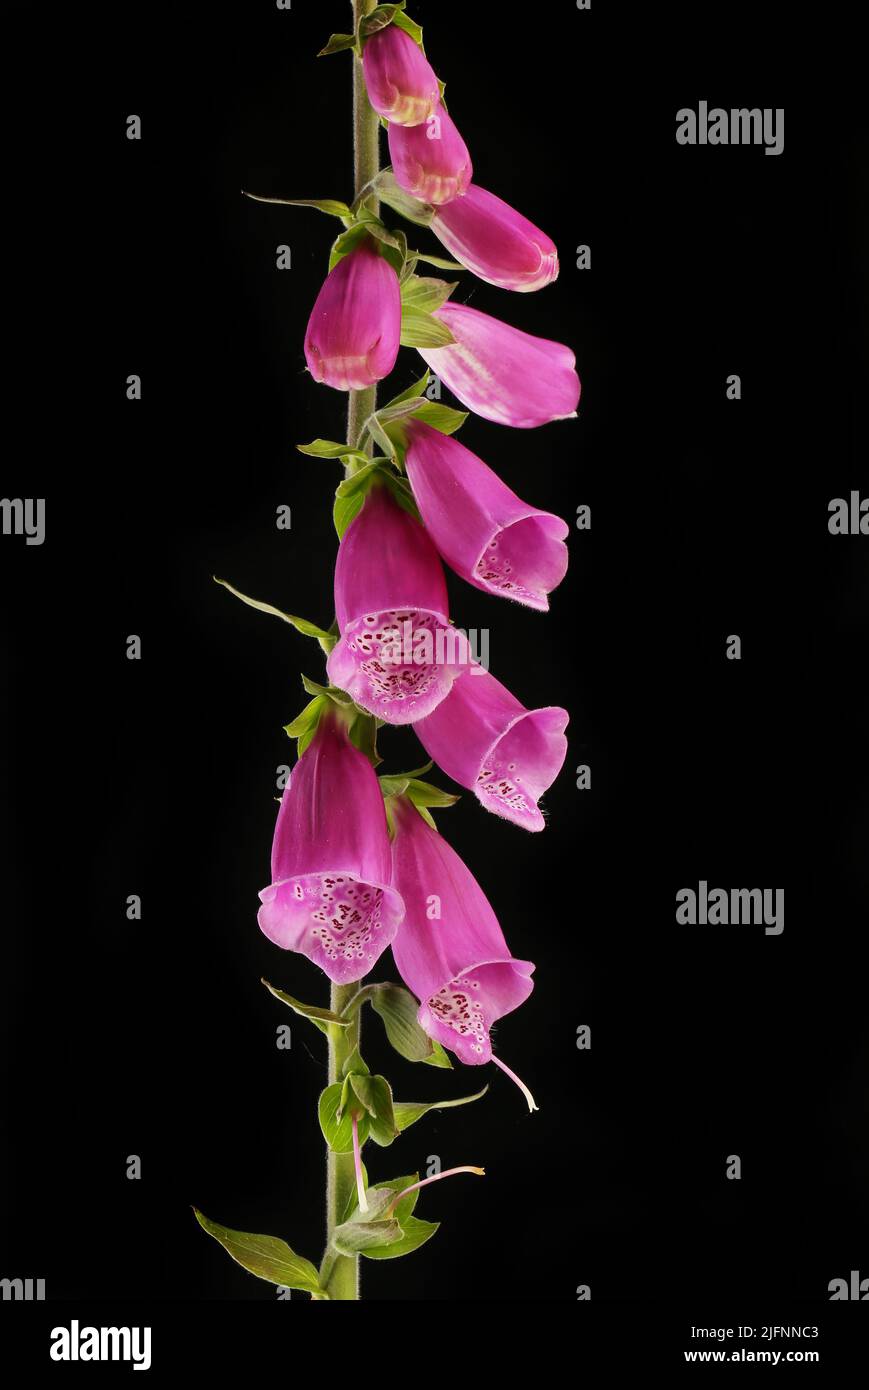 Foxgloves flowers against a black background Stock Photo